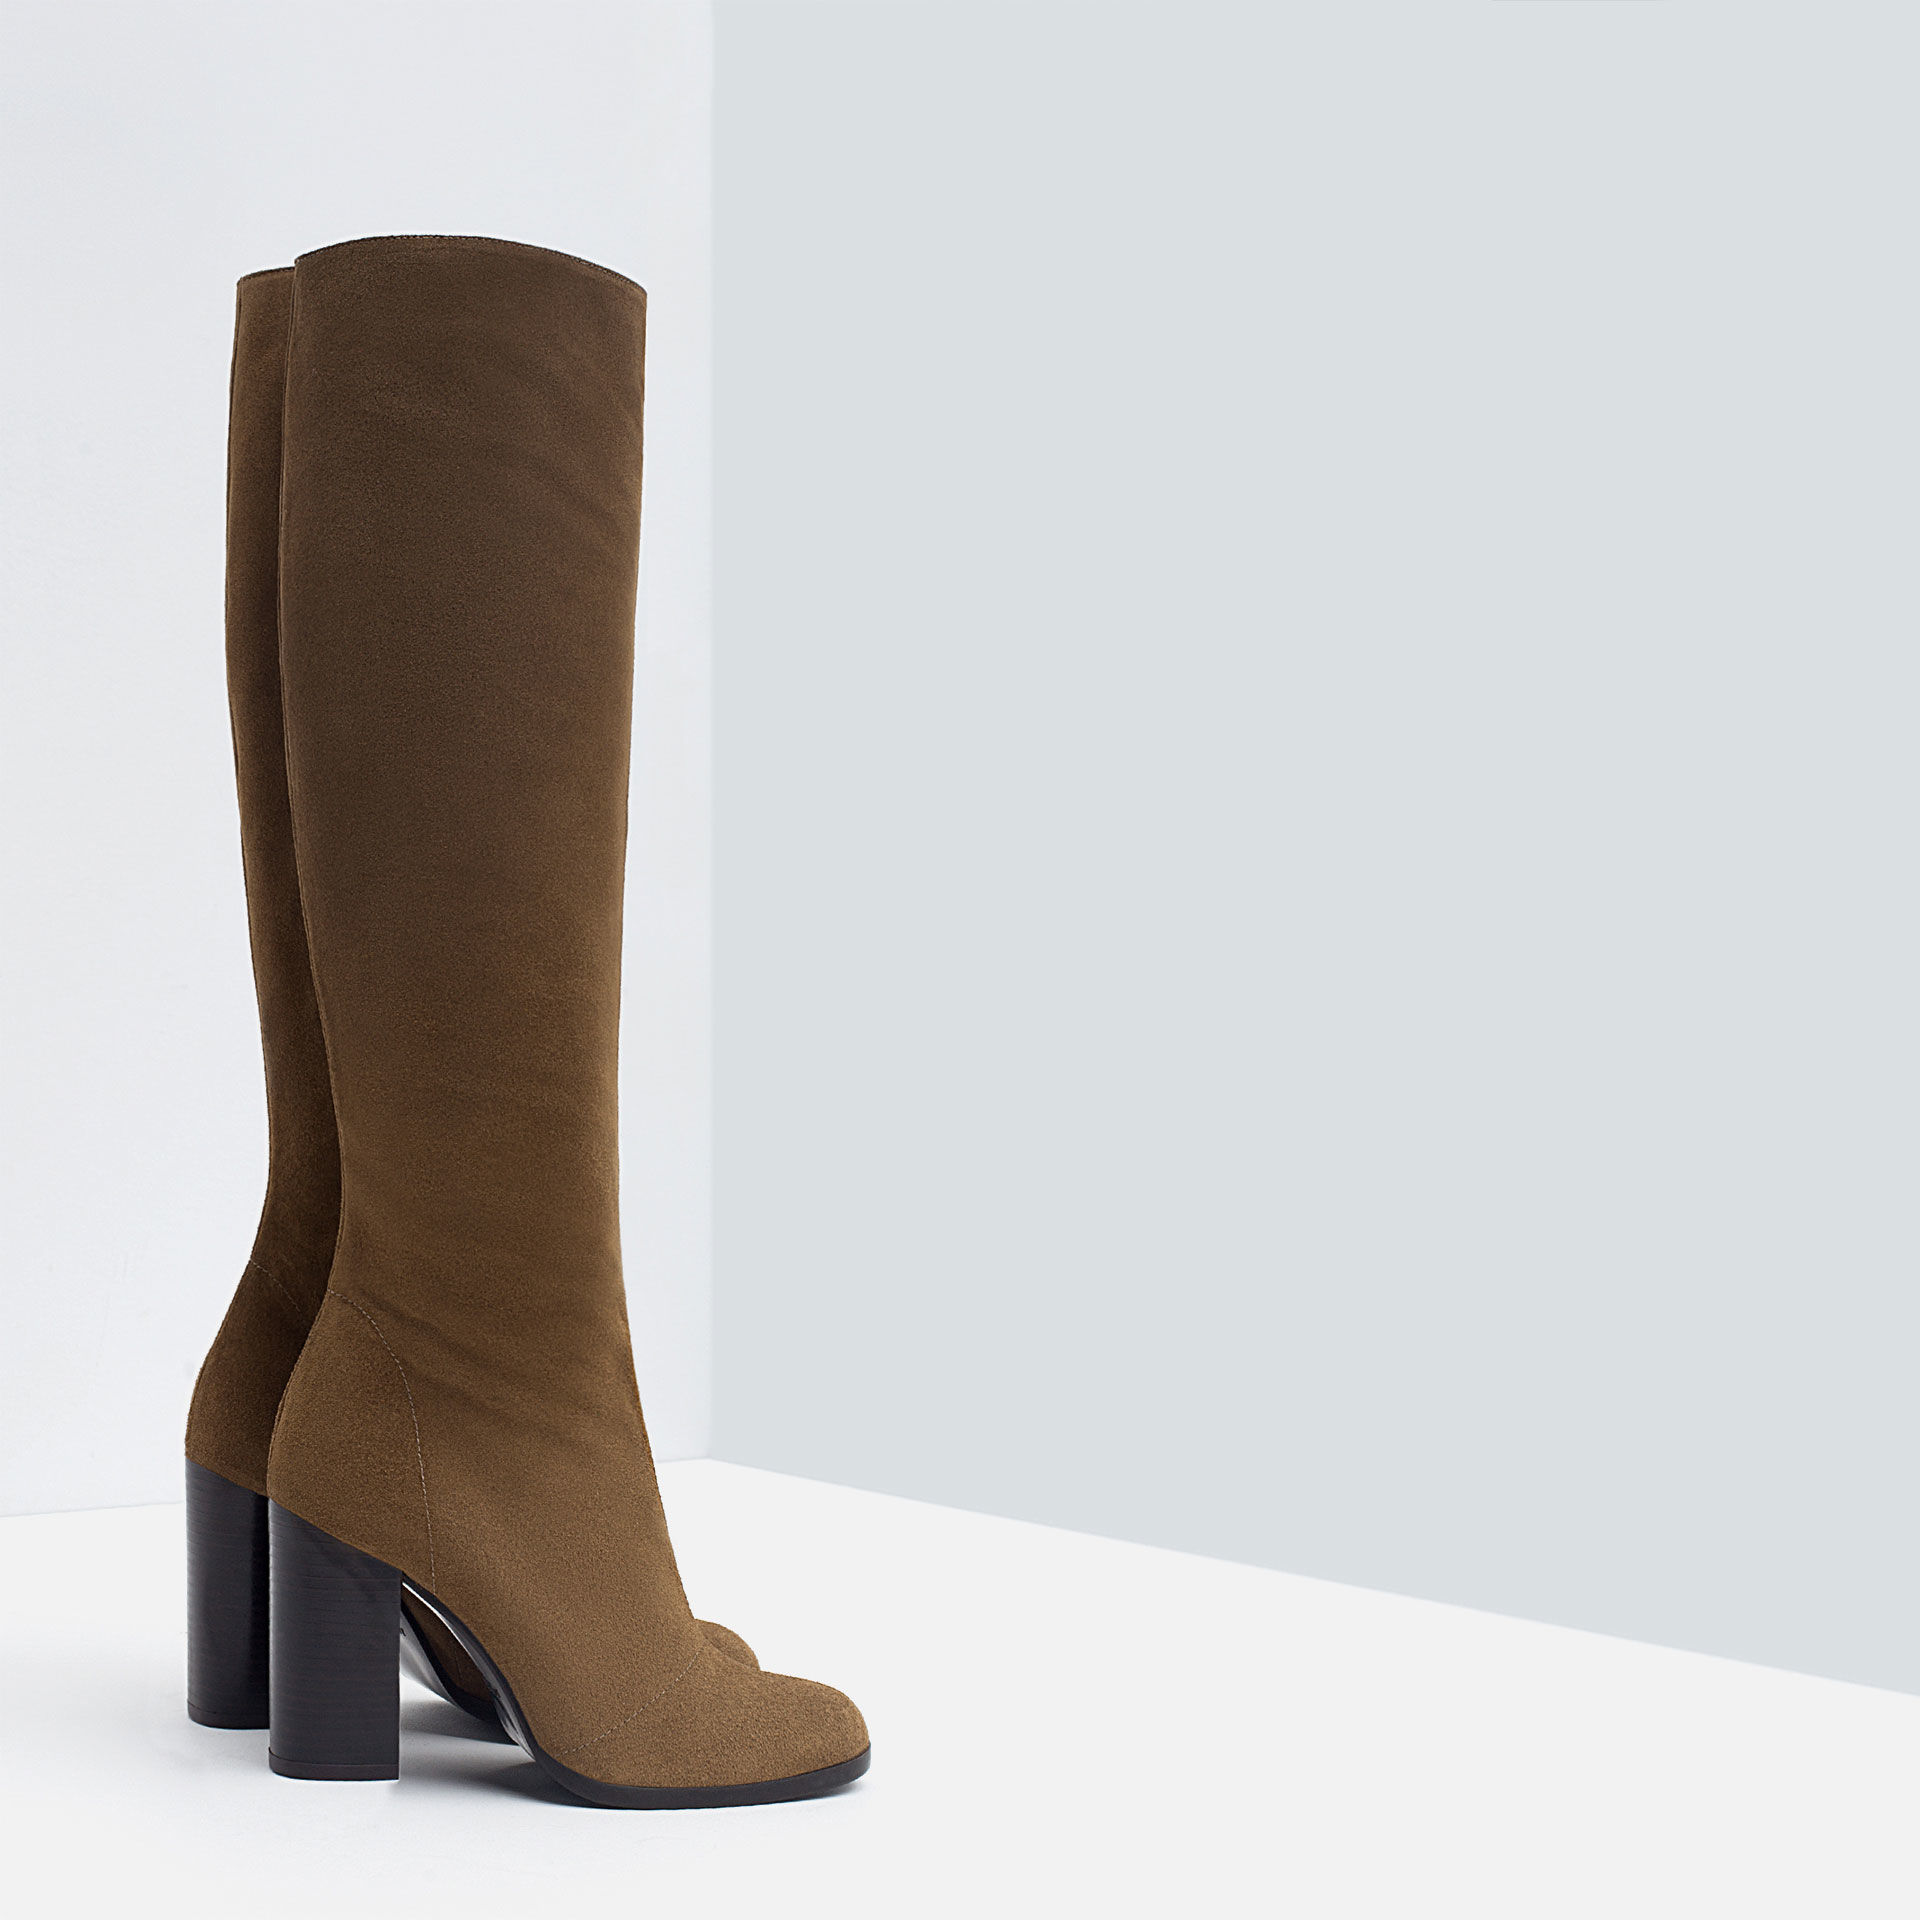 Zara High Heel Leather Boots in Brown | Lyst